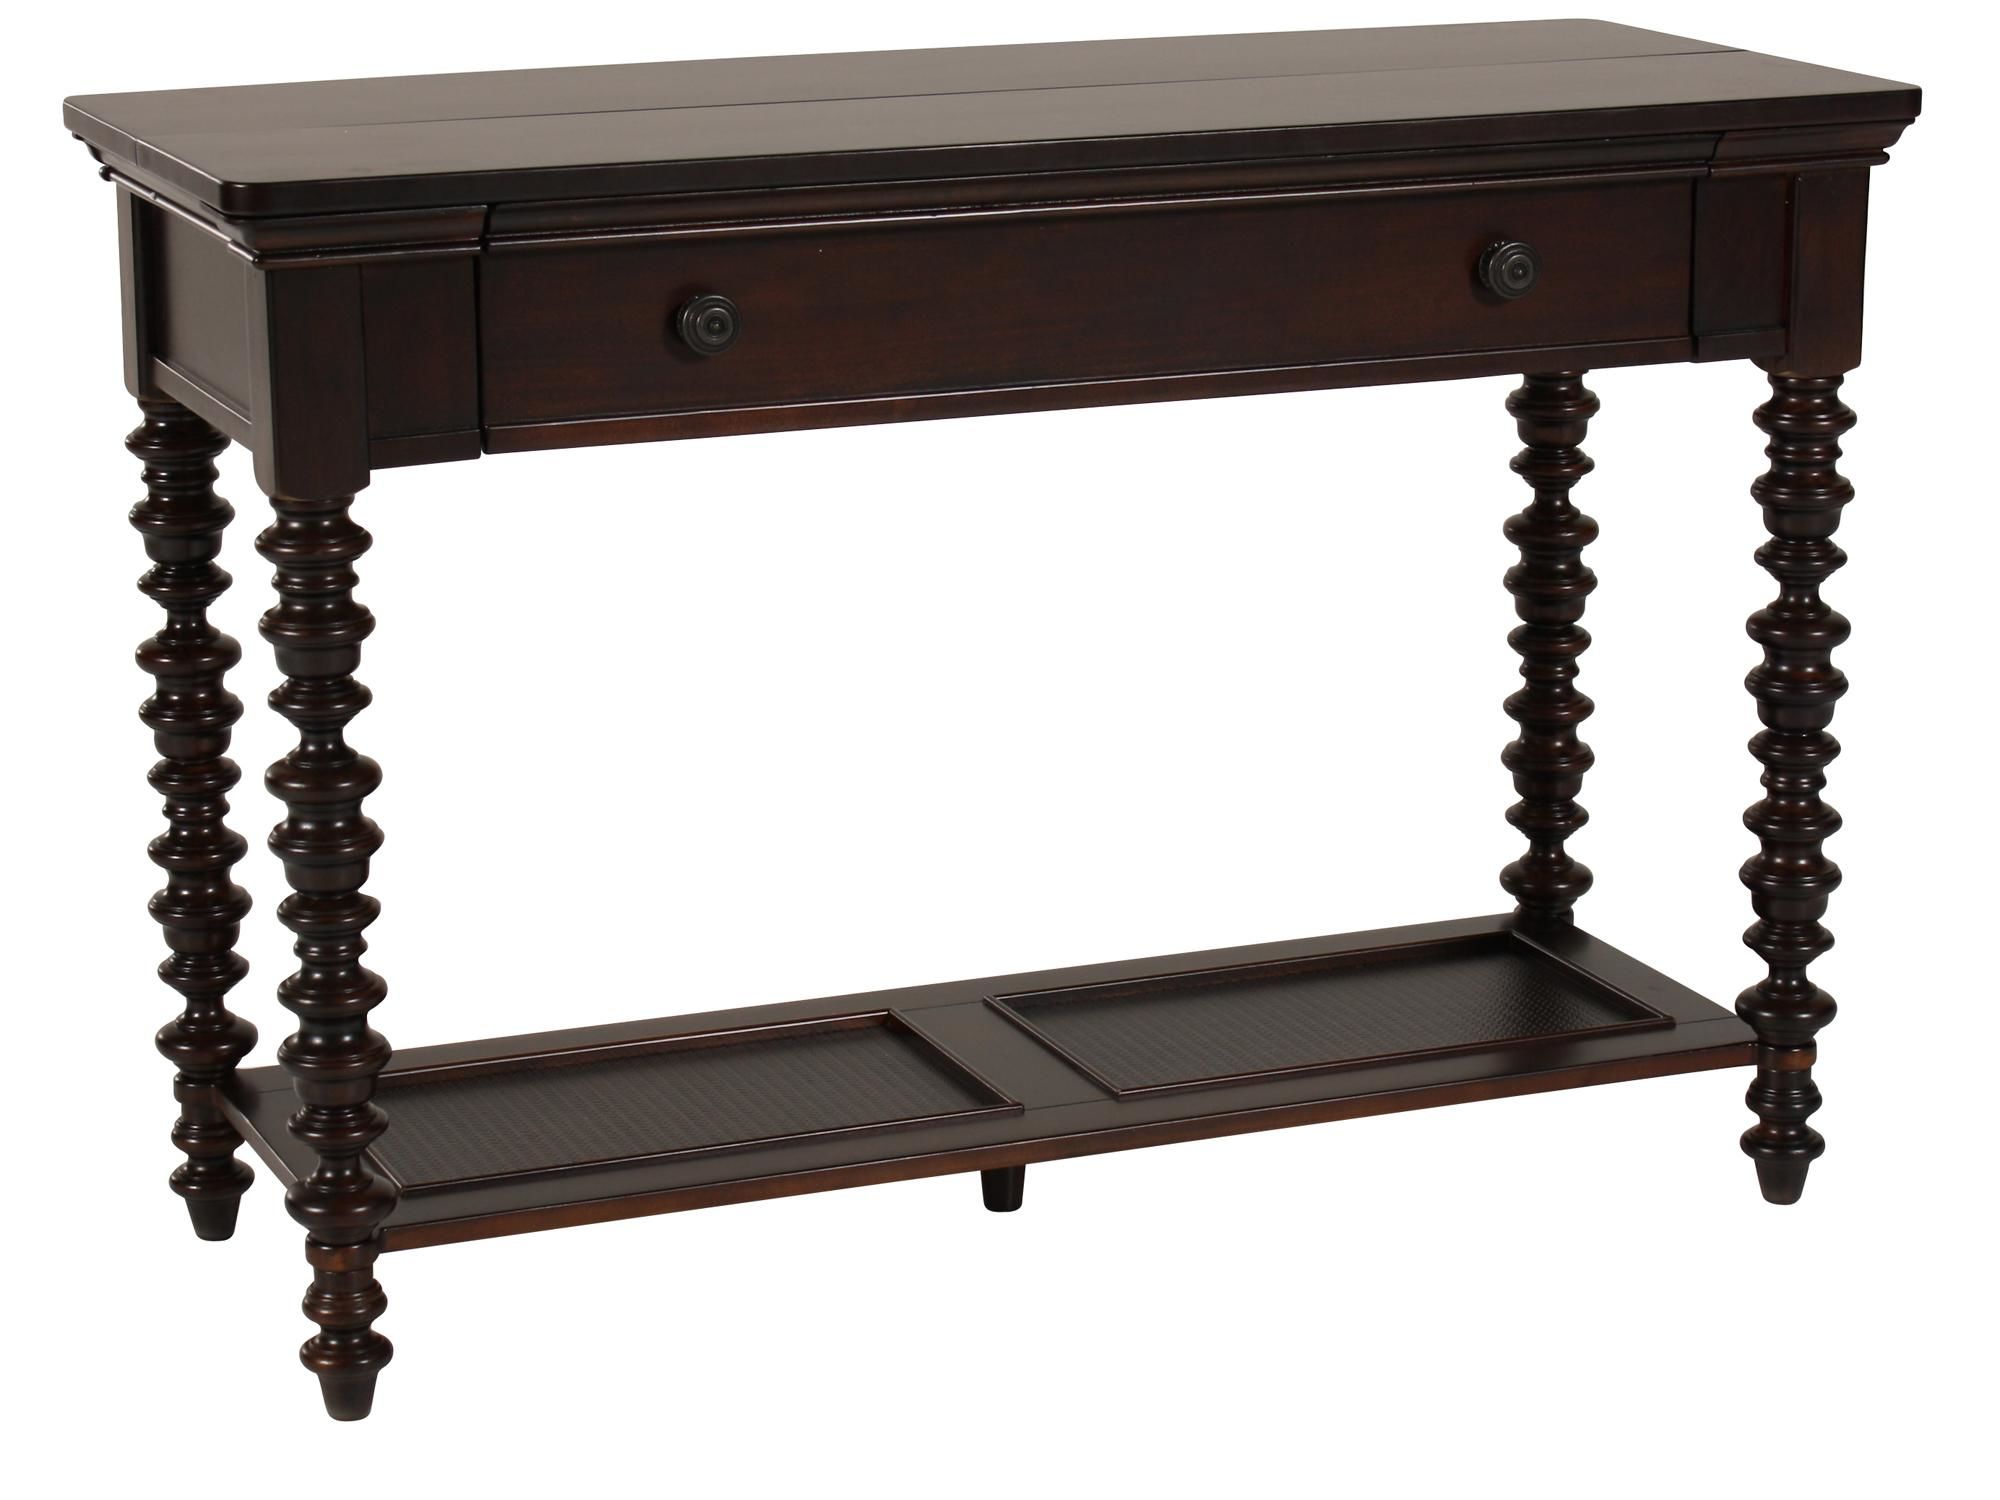 spindle leg traditional console table dark brown mathis brothers ash wood accent pottery barn kitchen tables and chairs small cabinet with doors marble look dining target